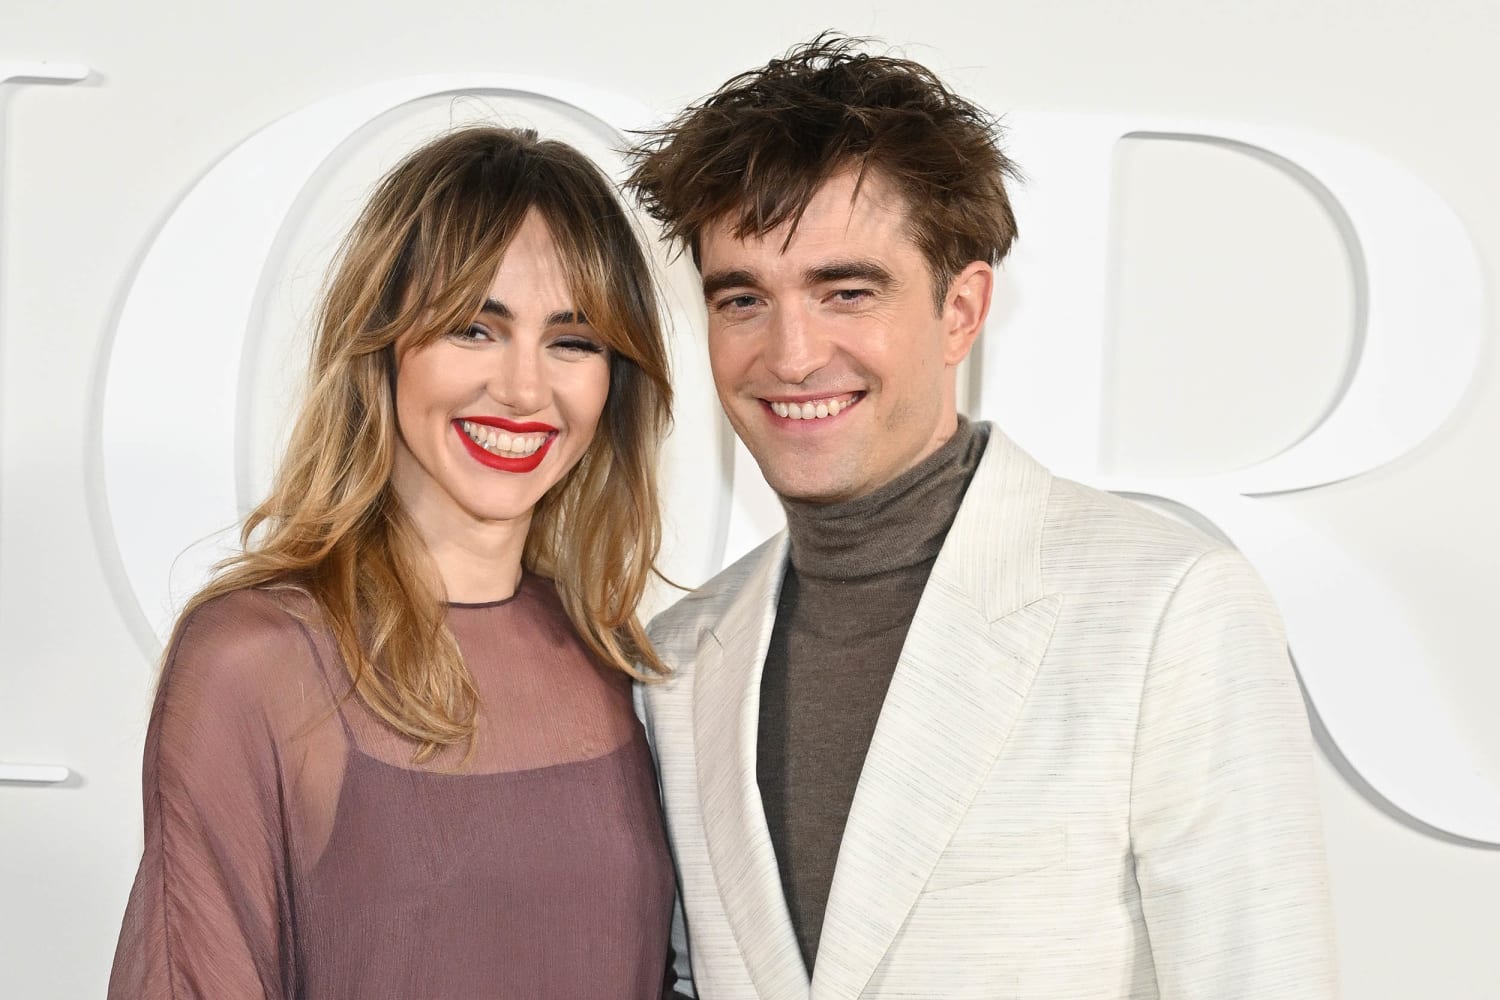 Suki Waterhouse subtly reveals the sex of her and Robert Pattinson's baby at Coachella